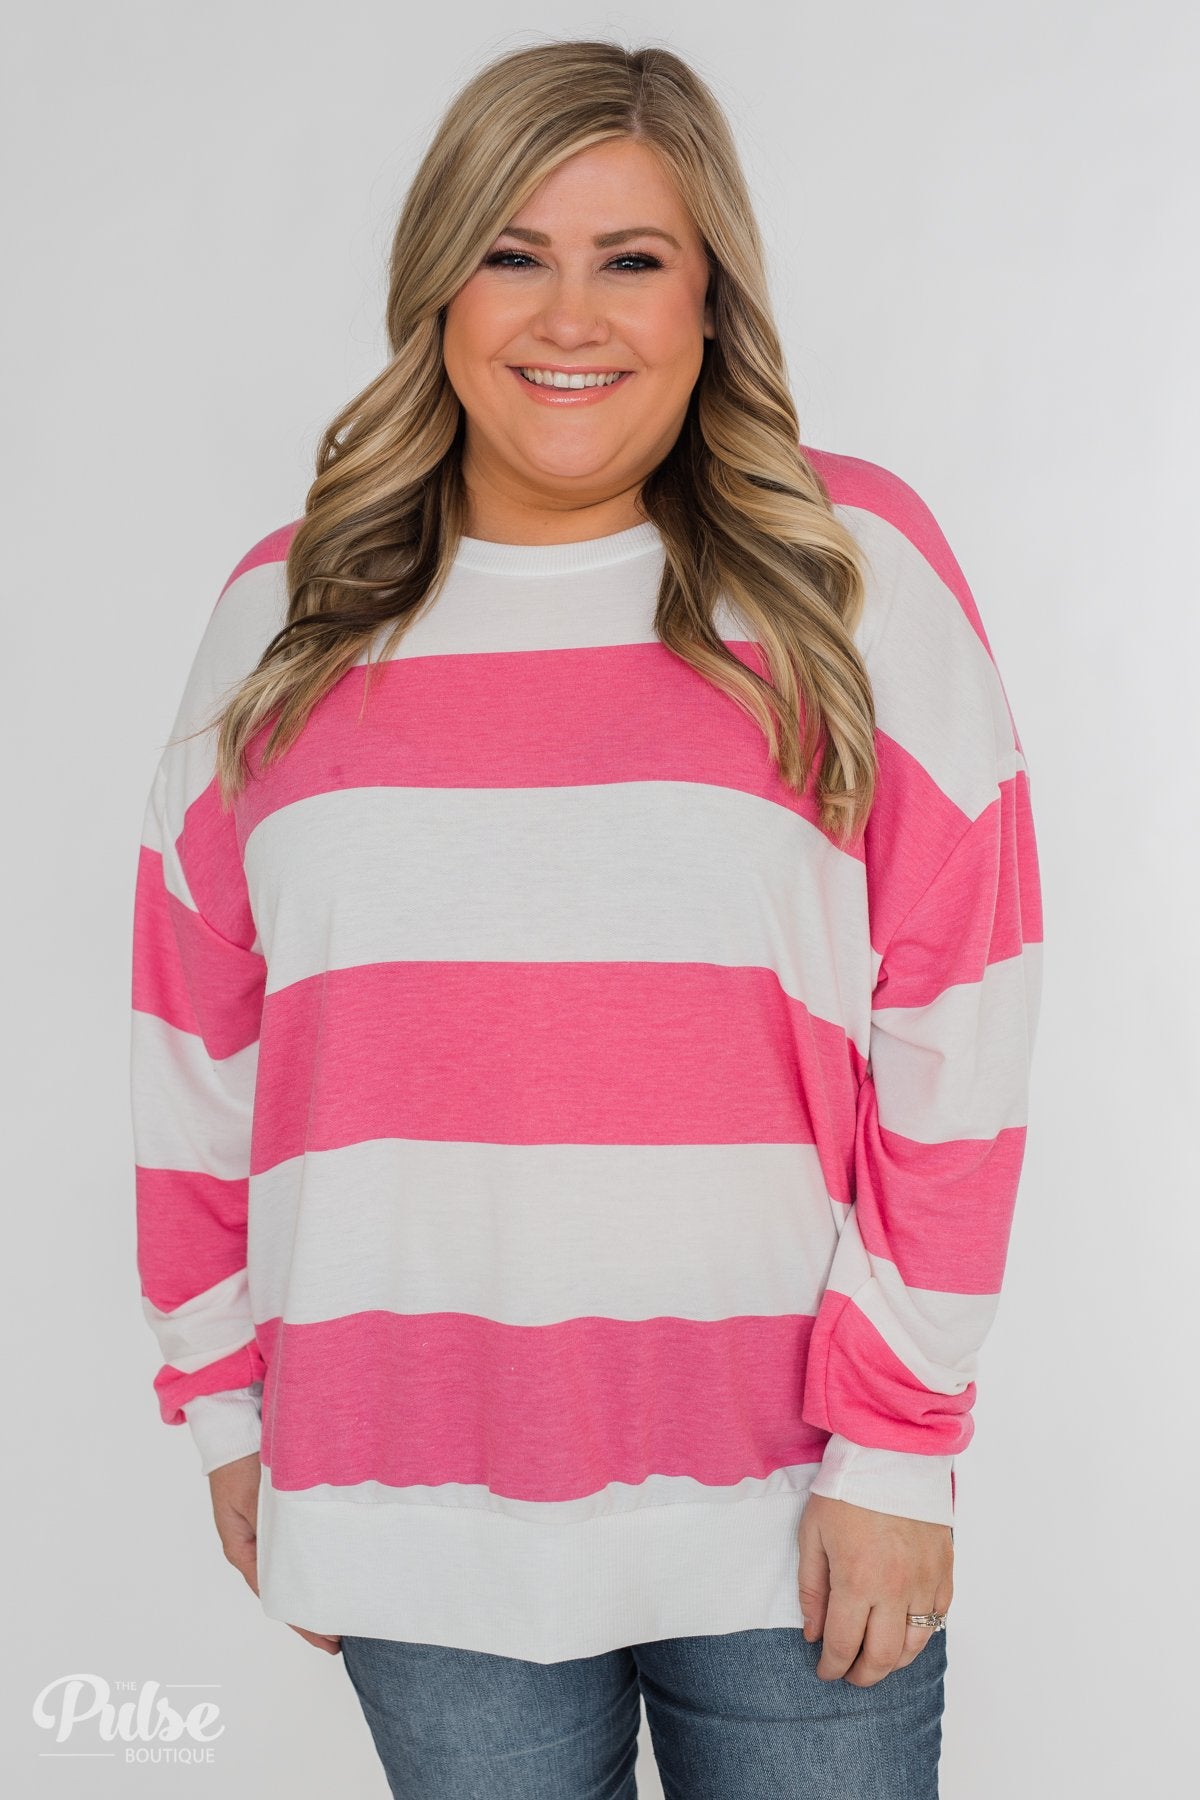 Good Day for Sunshine Striped Pullover- Pink & Off White